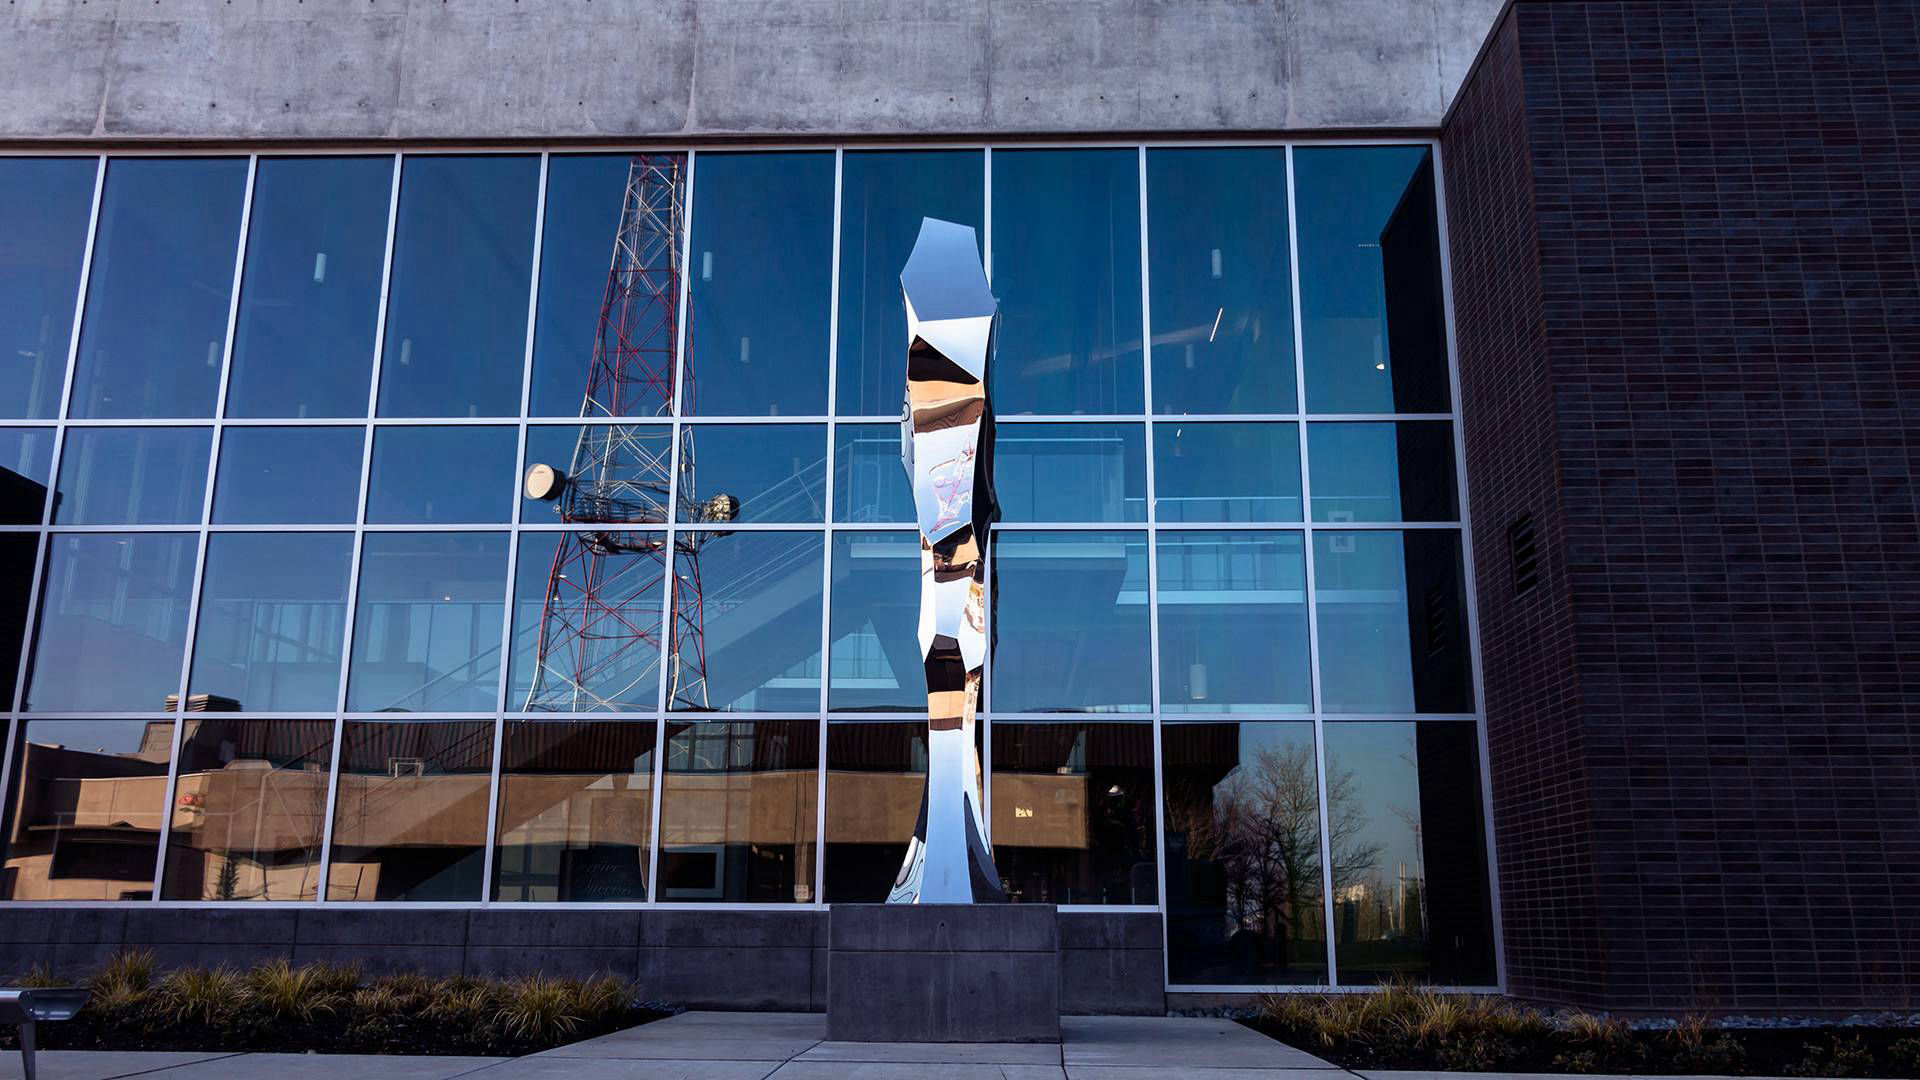 YES mirror polished stainless steel public art sculpture by Heath Satow Tacoma WA